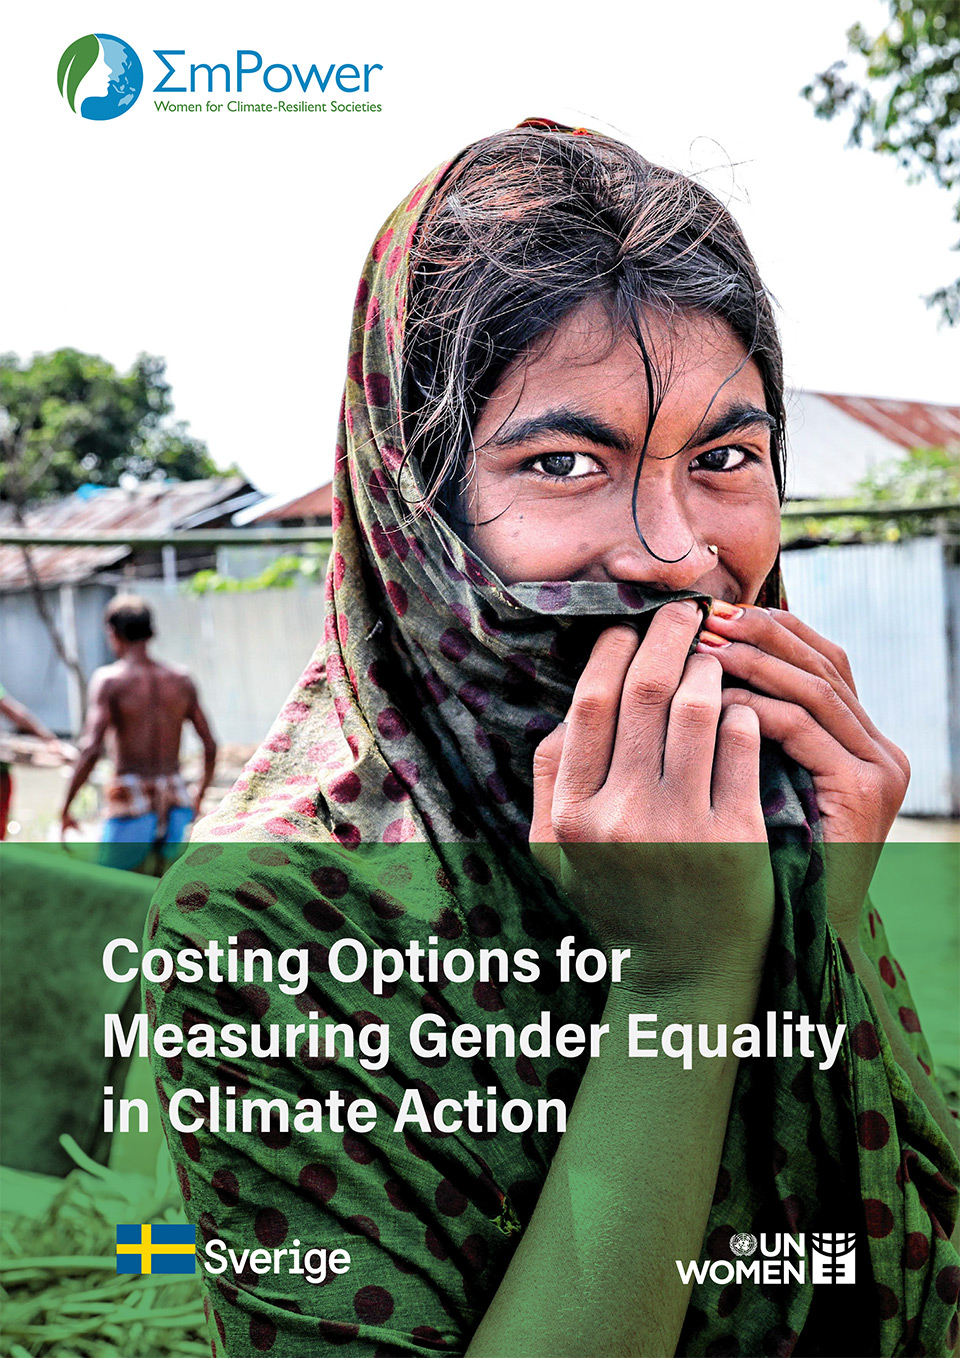 [COVER] Costing Options for Measuring Gender Equality in Climate Action